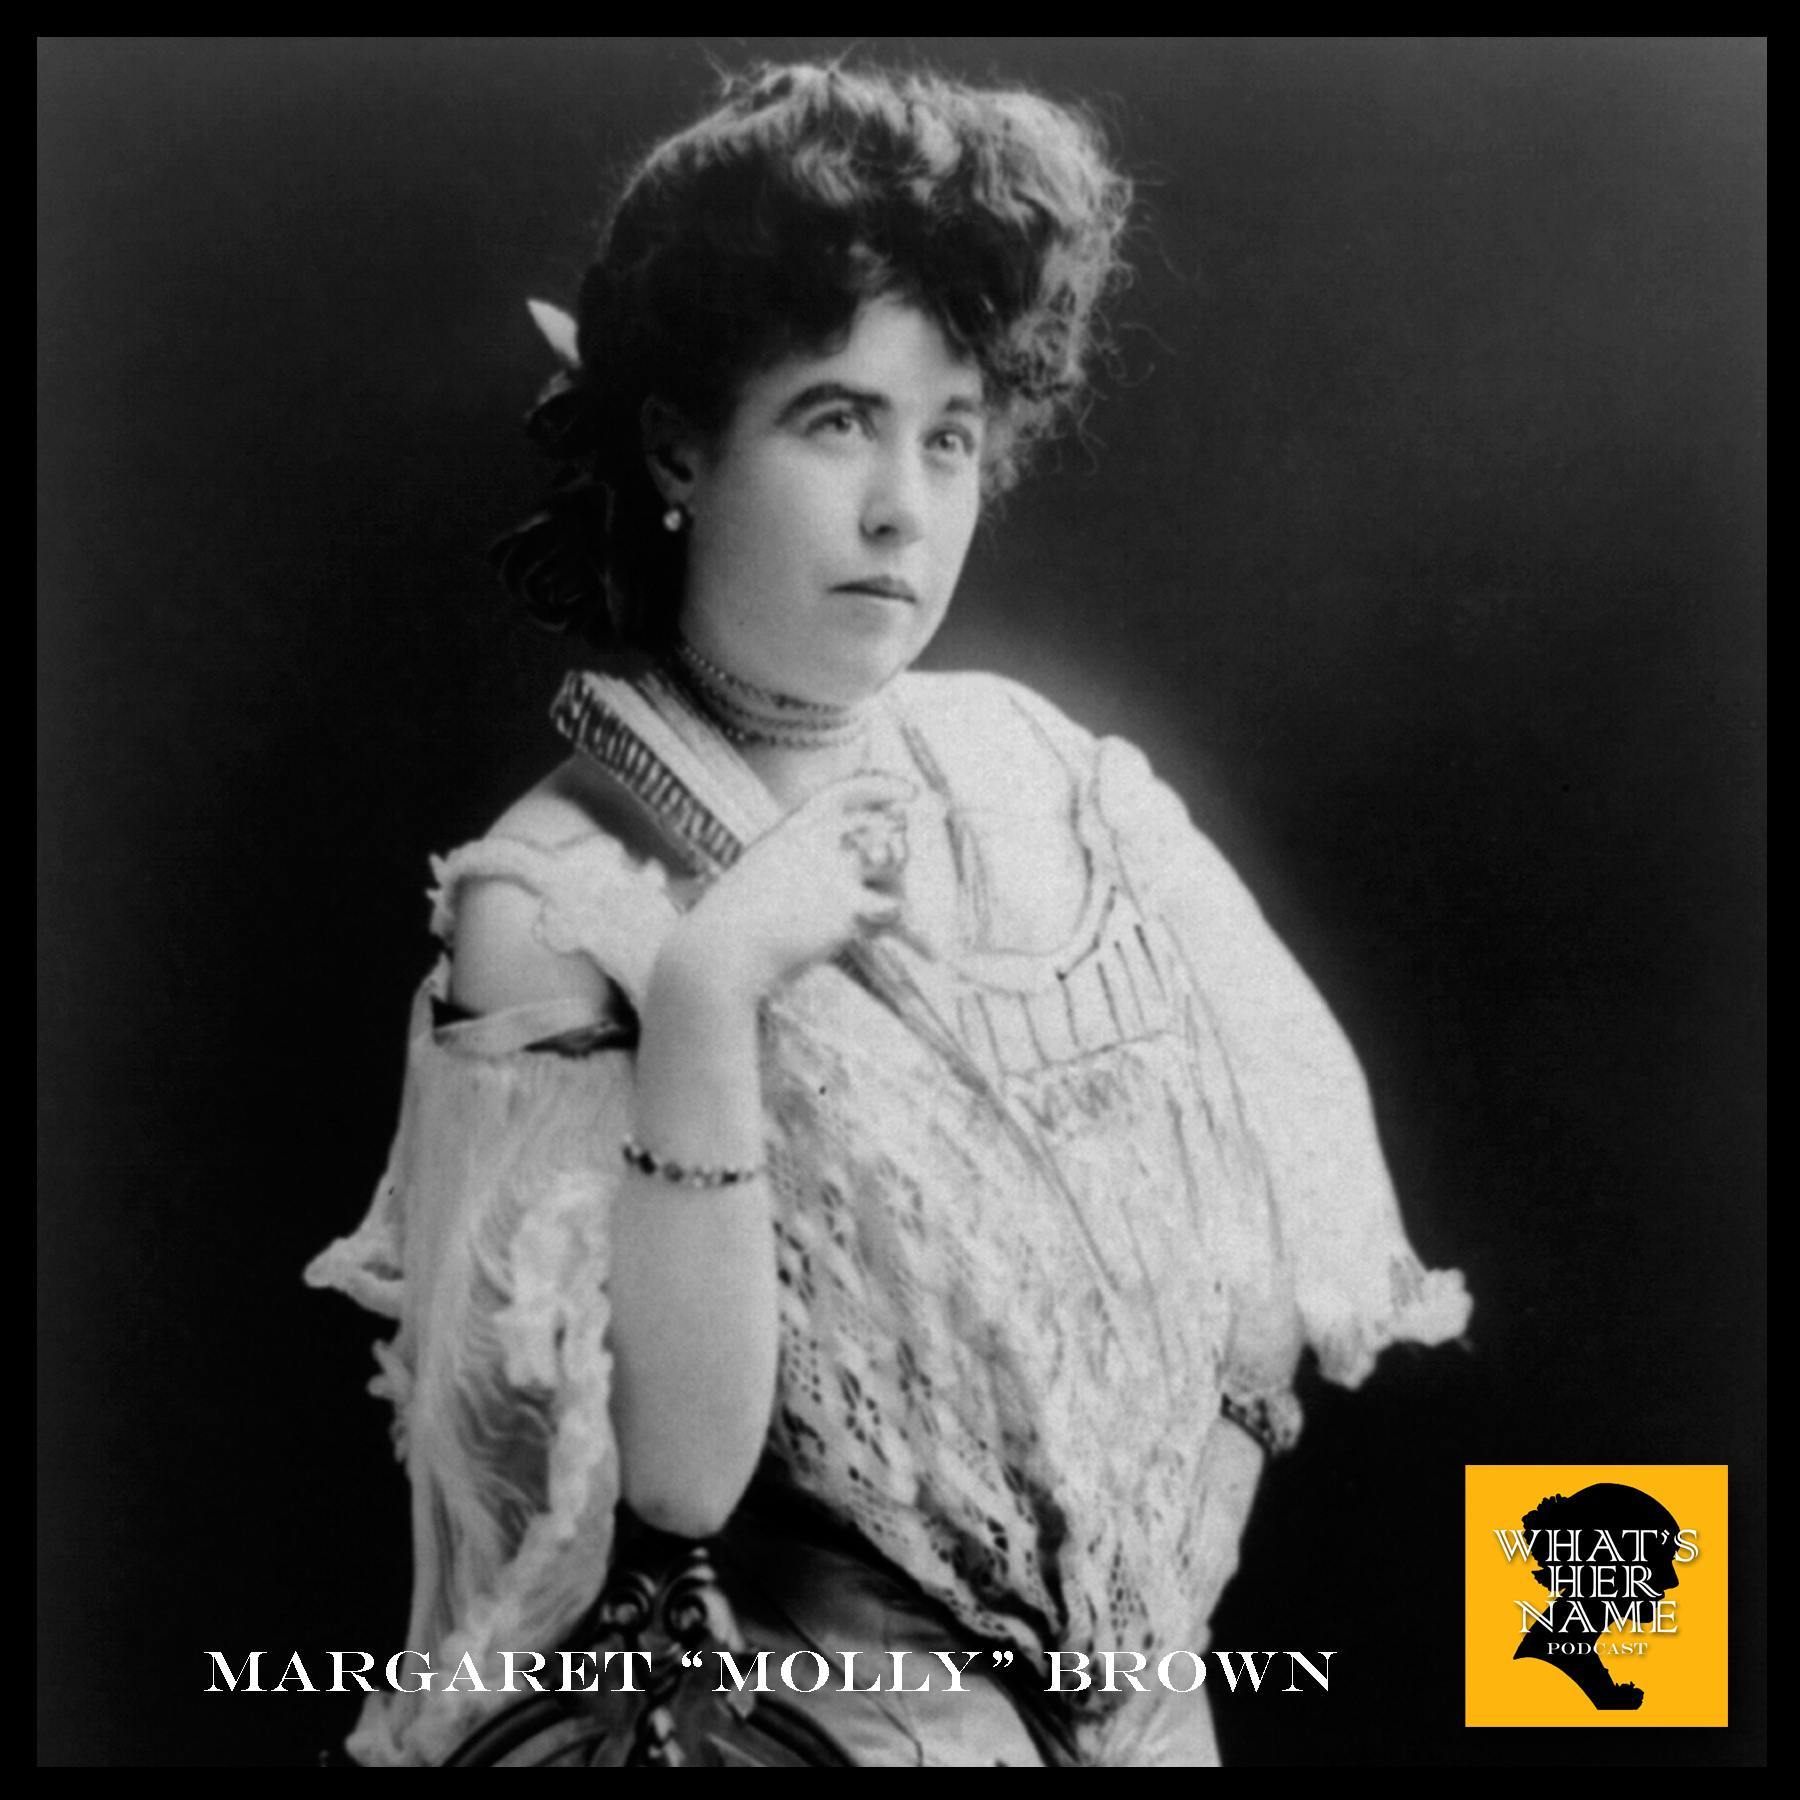 THE UNSINKABLE Margaret “Molly” Brown